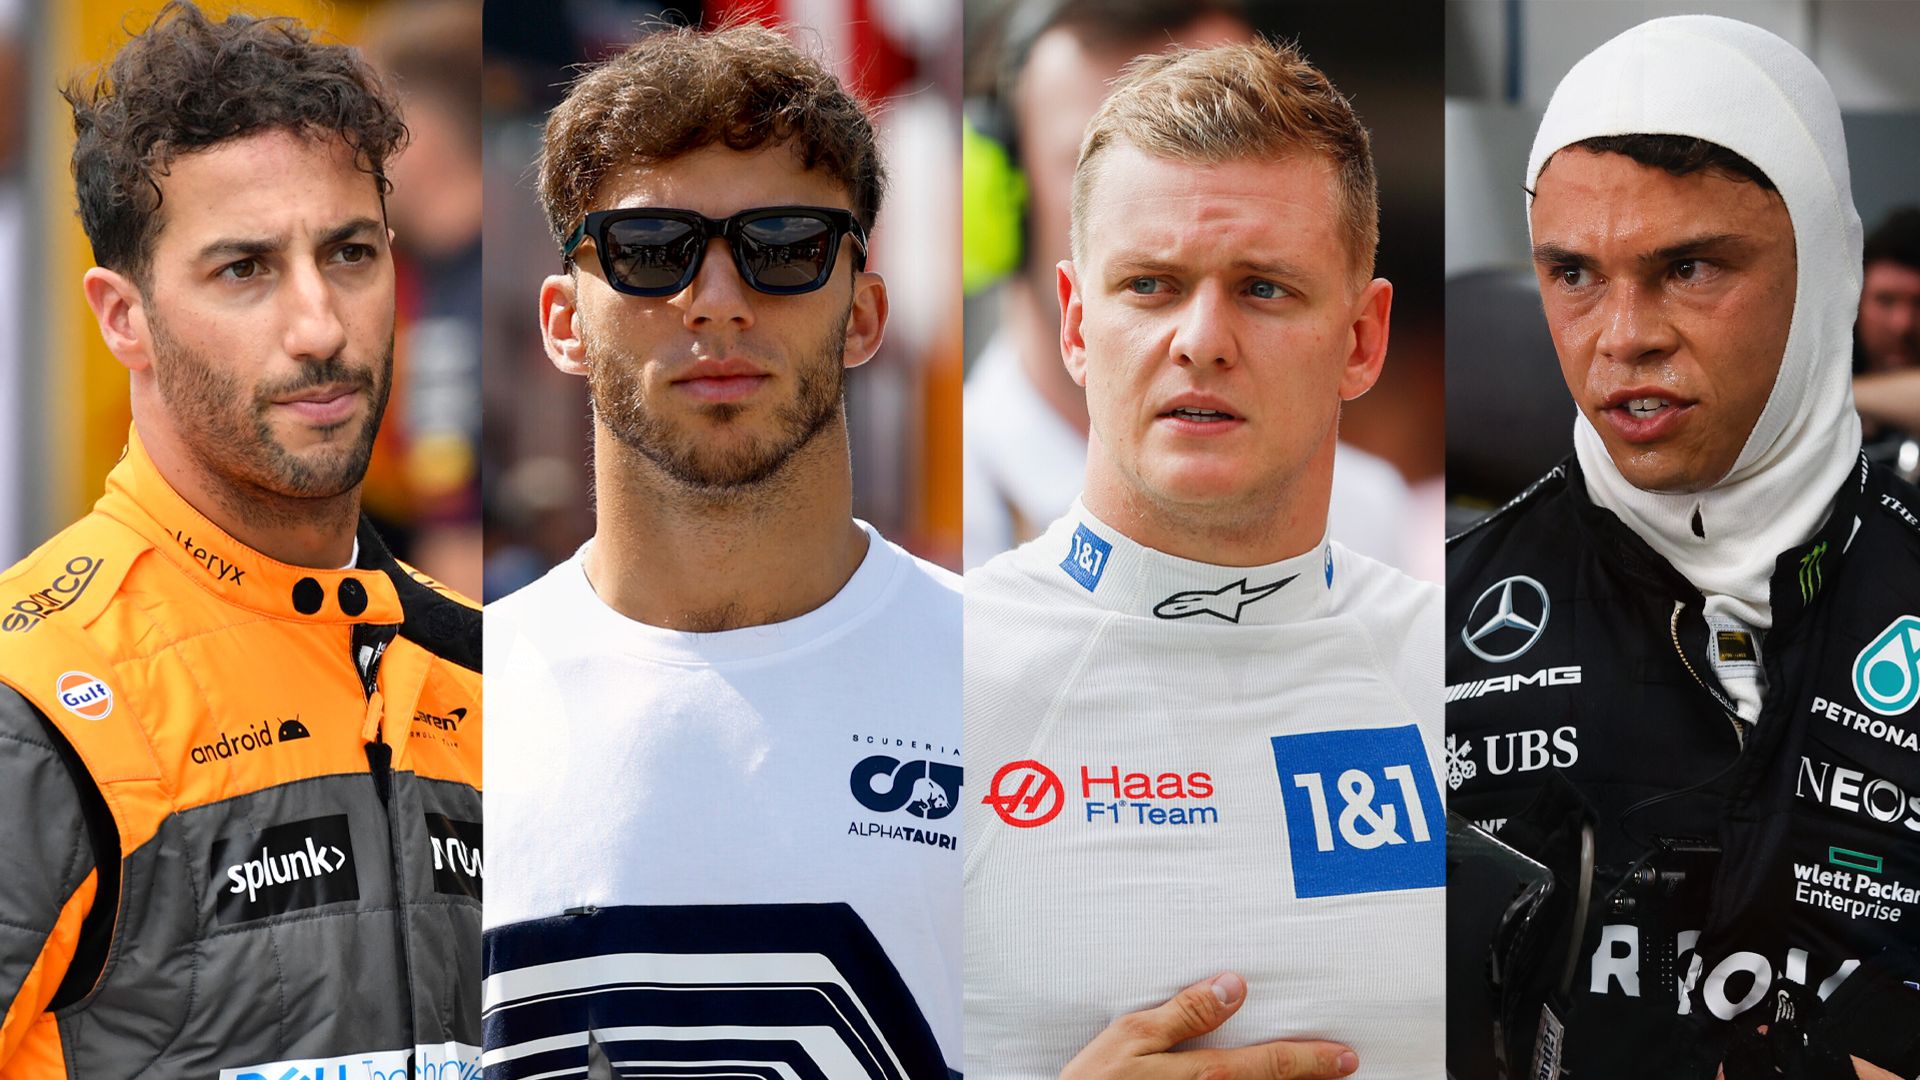 What now for F1's driver market? The stars in running for last seats